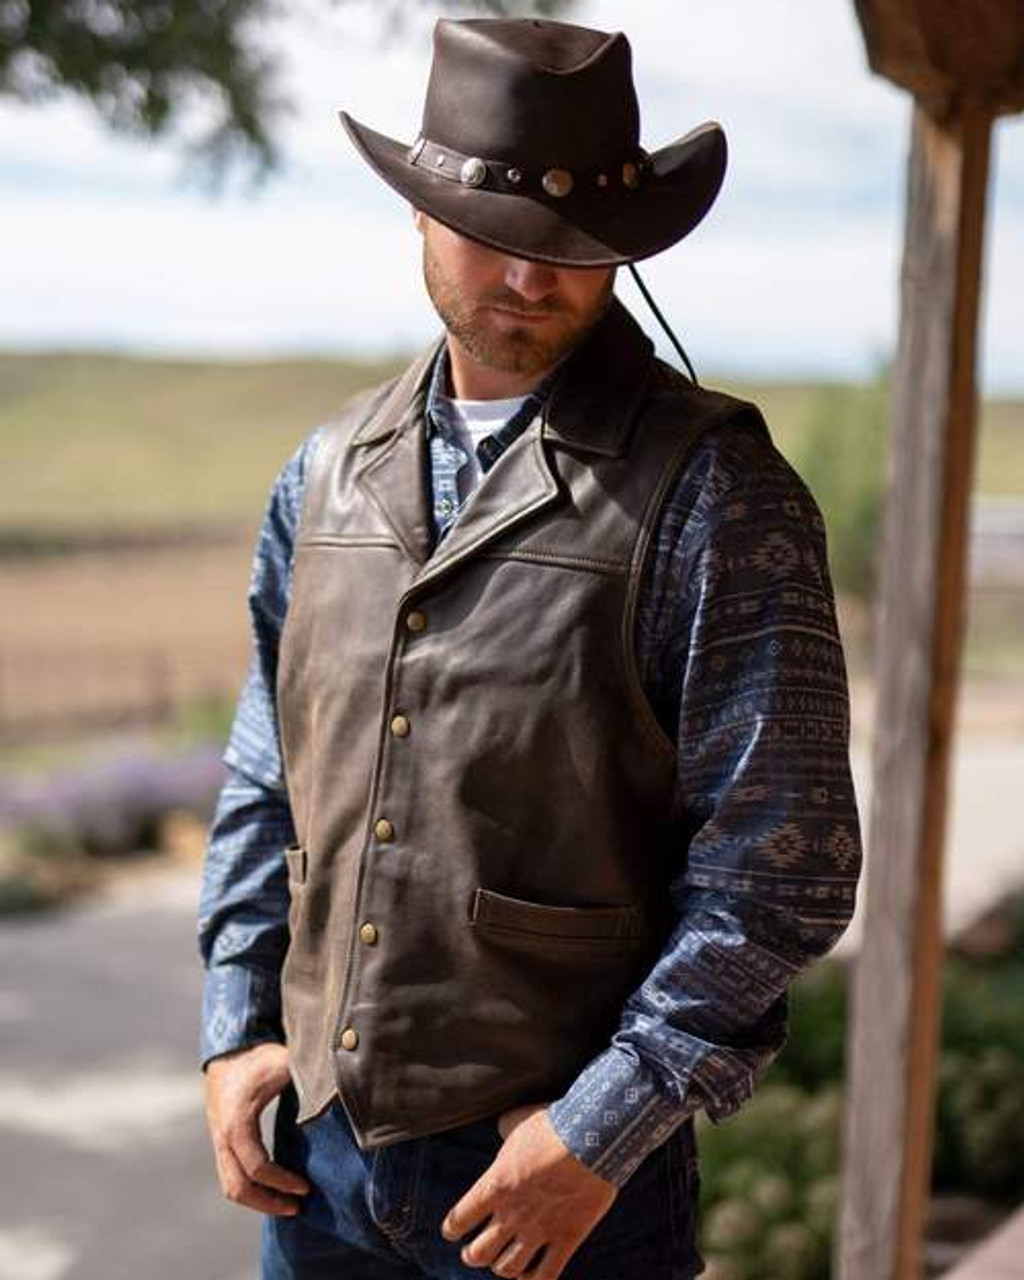 Legendary Western Leather Vest Moments: Icons of the Wild West